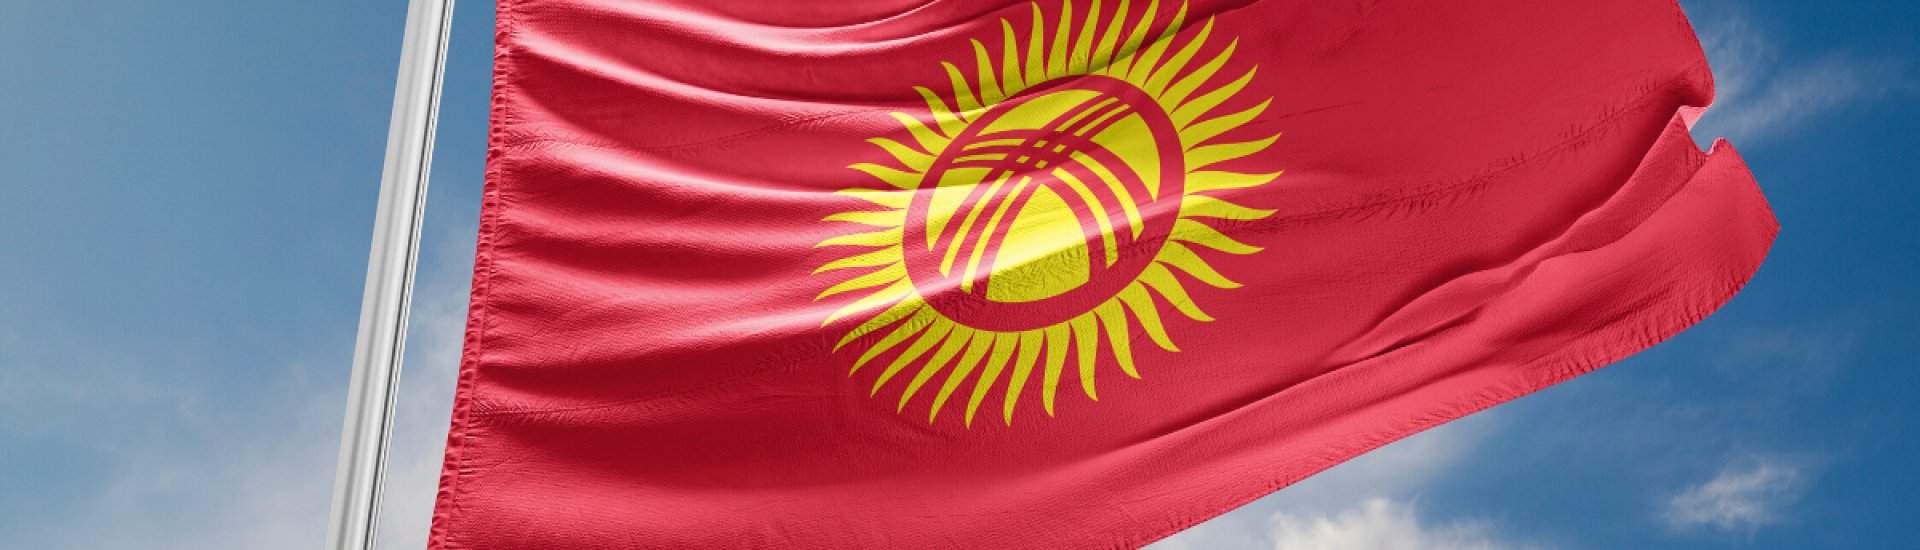 Kyrgyzstan entered the top 20 
countries-reformers under the 
Doing Business 2020